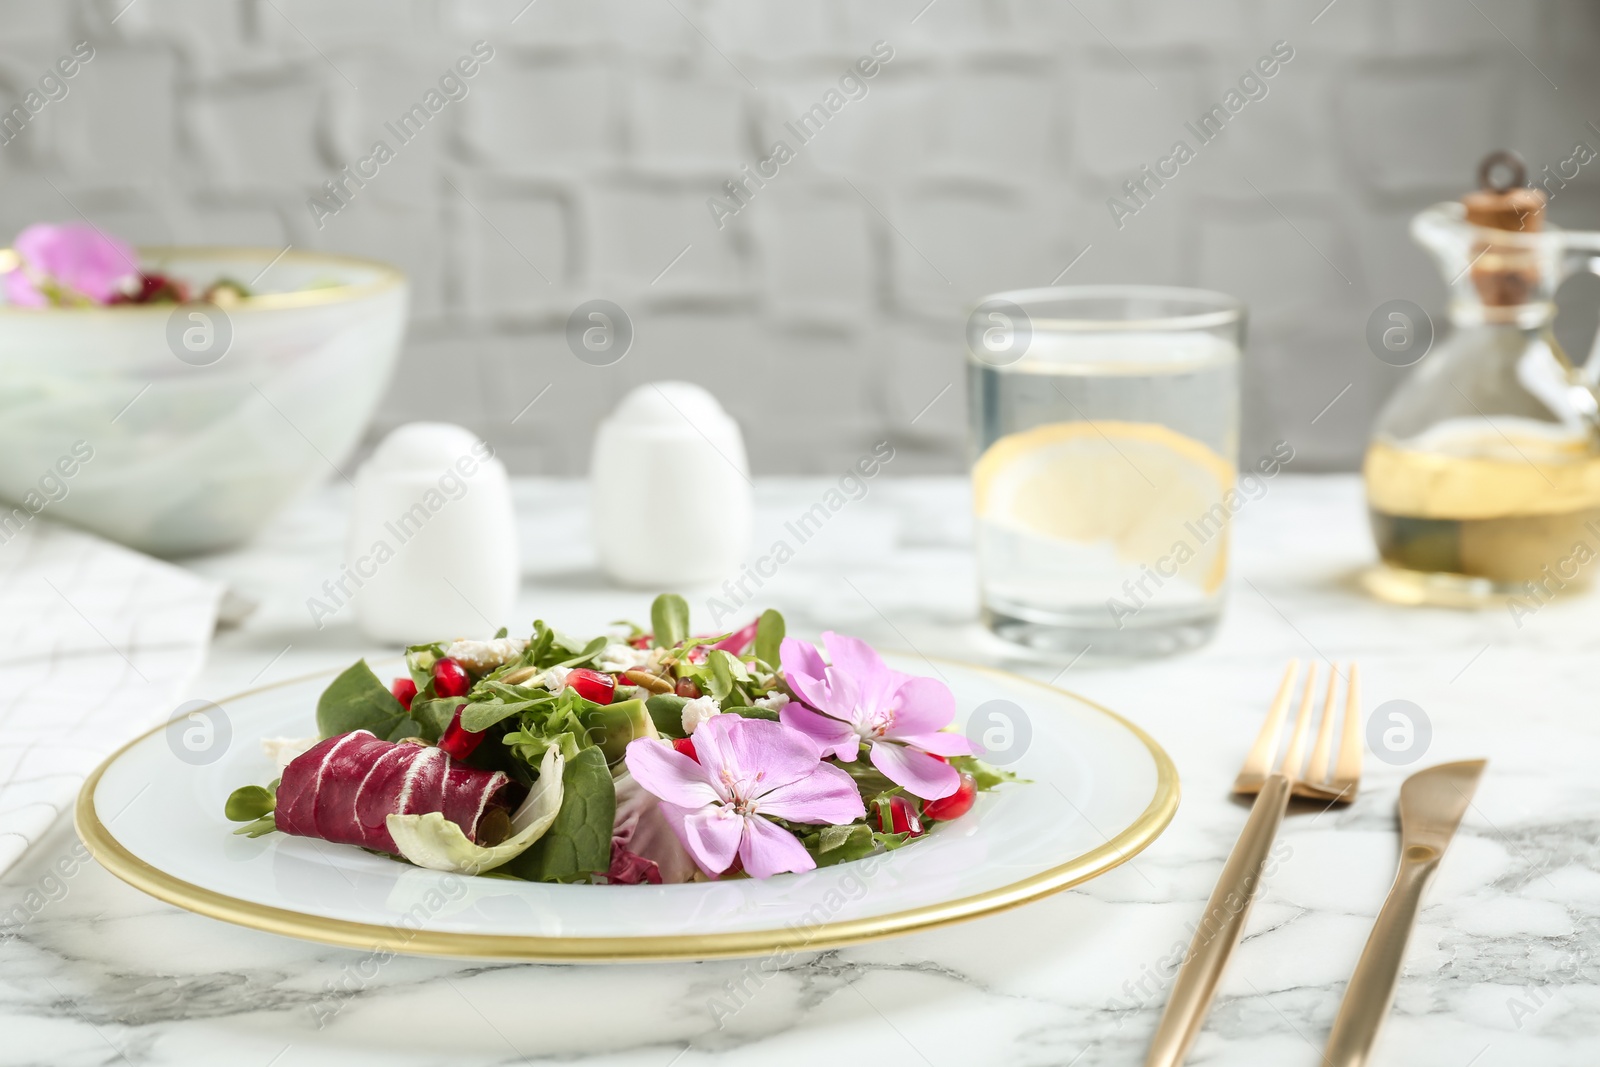 Photo of Fresh spring salad with flowers served on white marble table